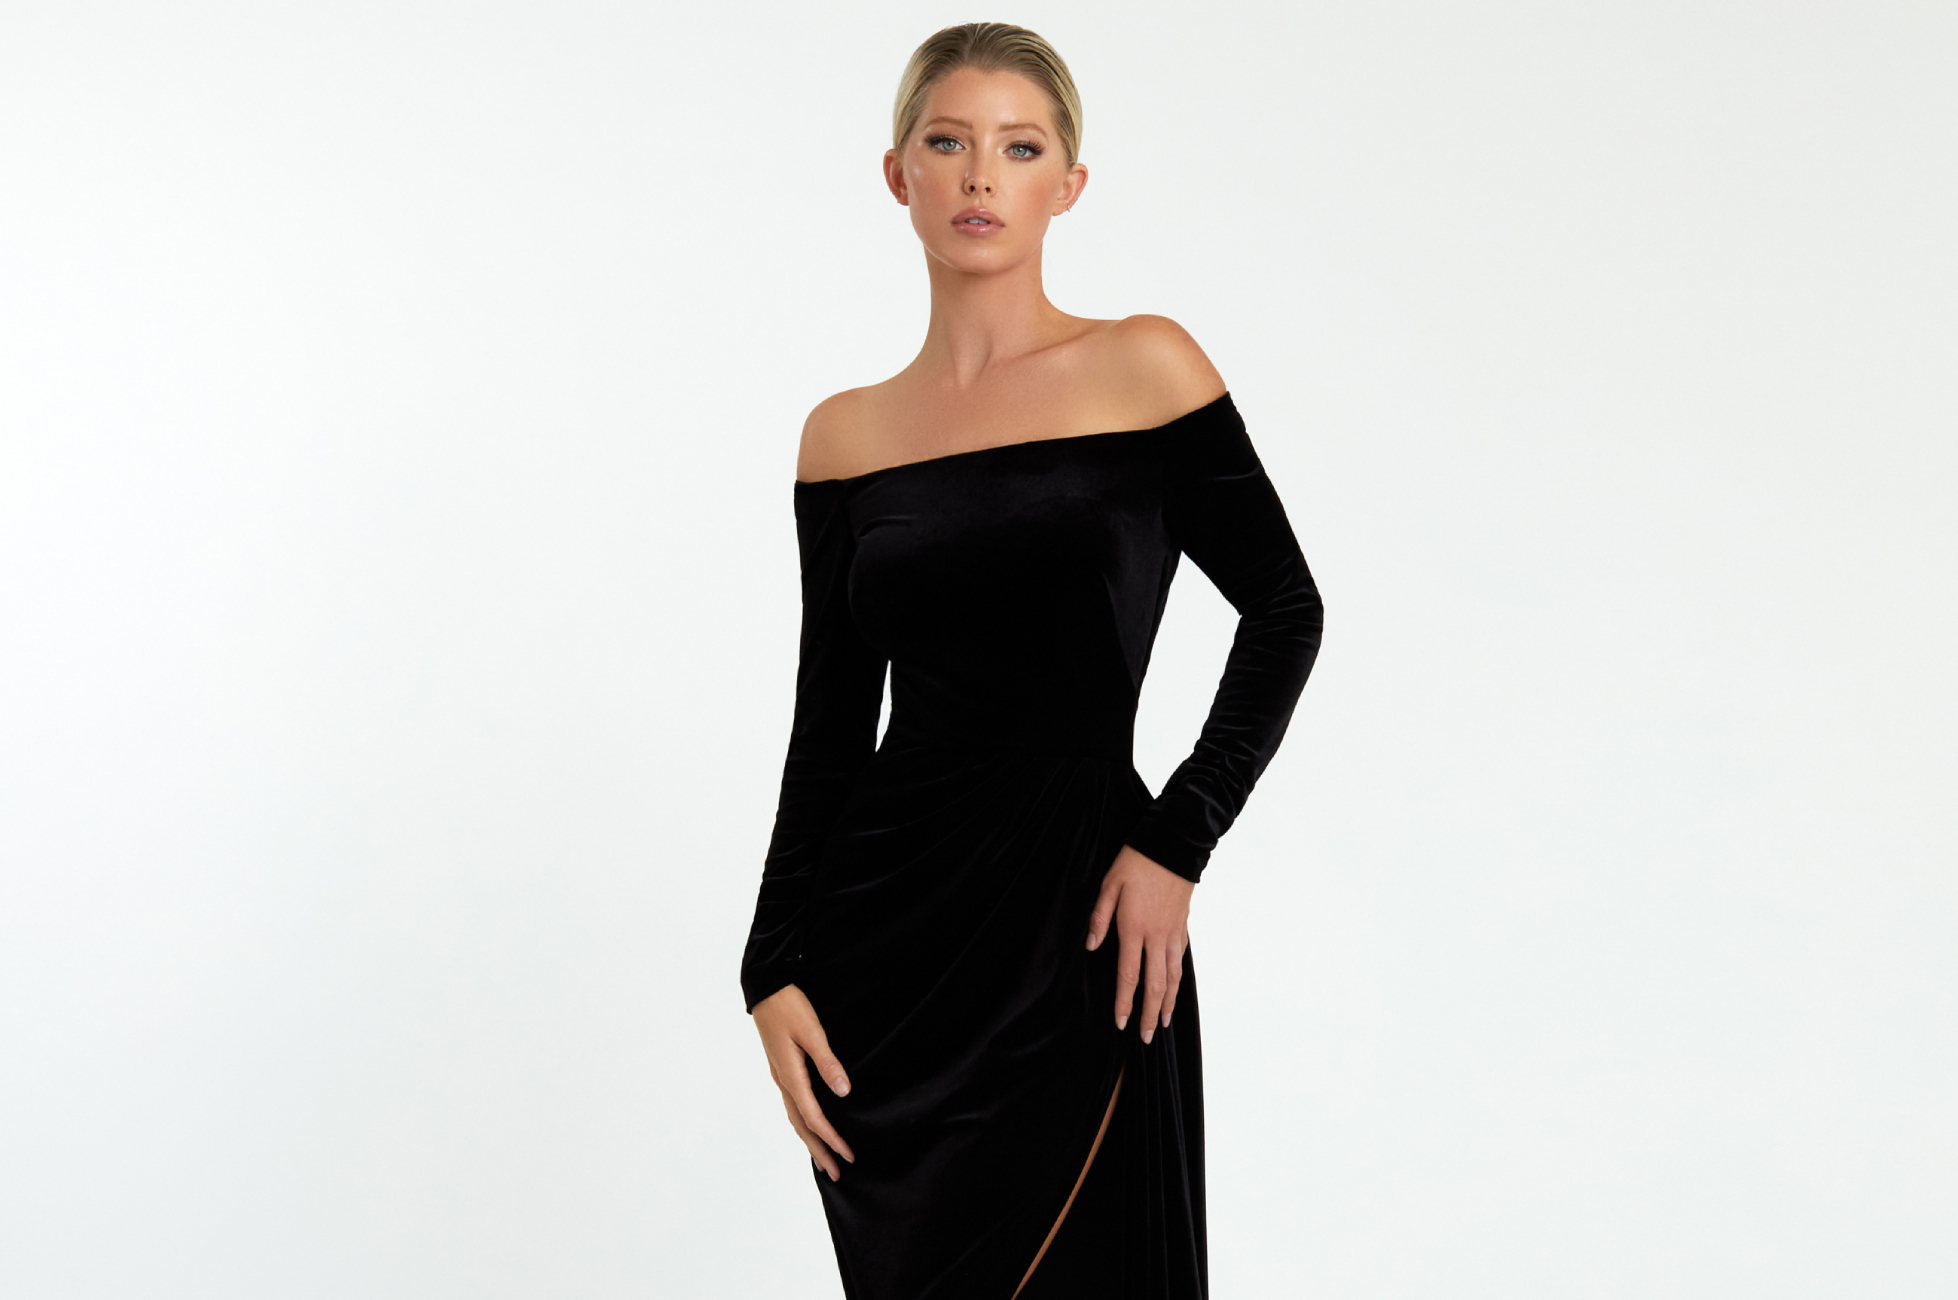 Model wearing a black evening gown